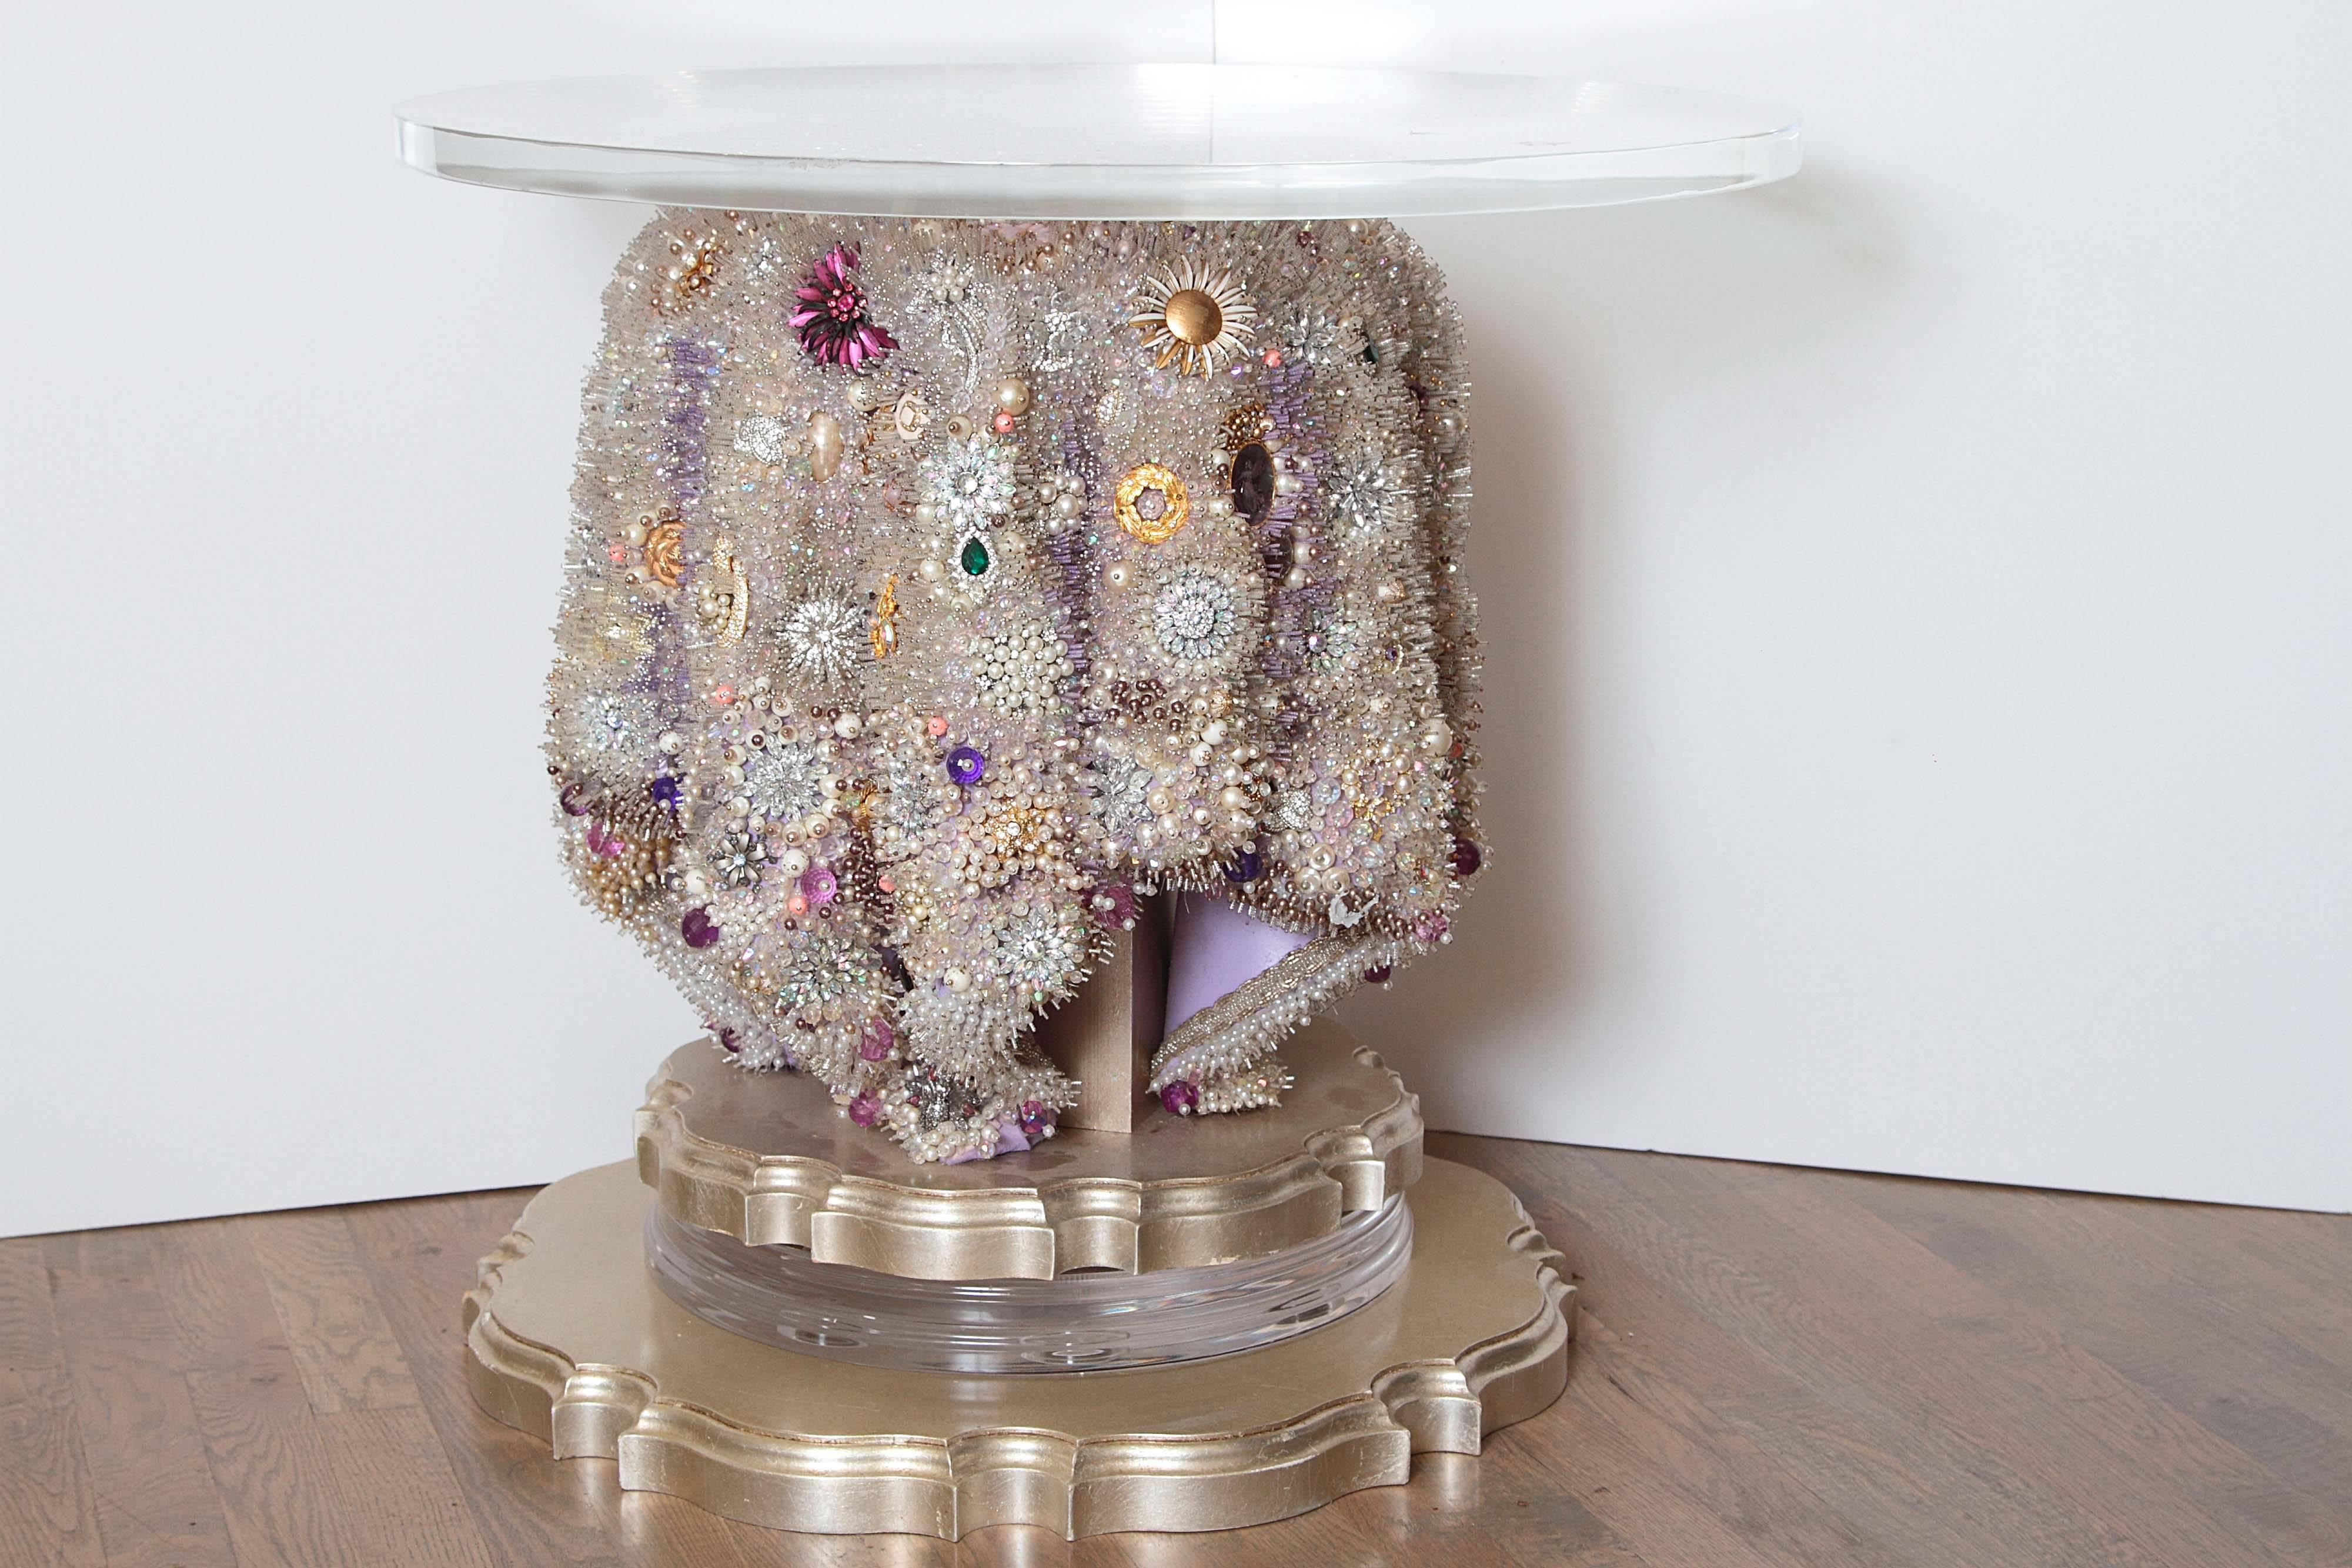 This one of a kind table is encrusted with over half a million glass seed beads, thousands of vintage and new beads and hundred of vintage brooches. This table was created to provide an illusion of beautiful beaded fabric draped over to create a